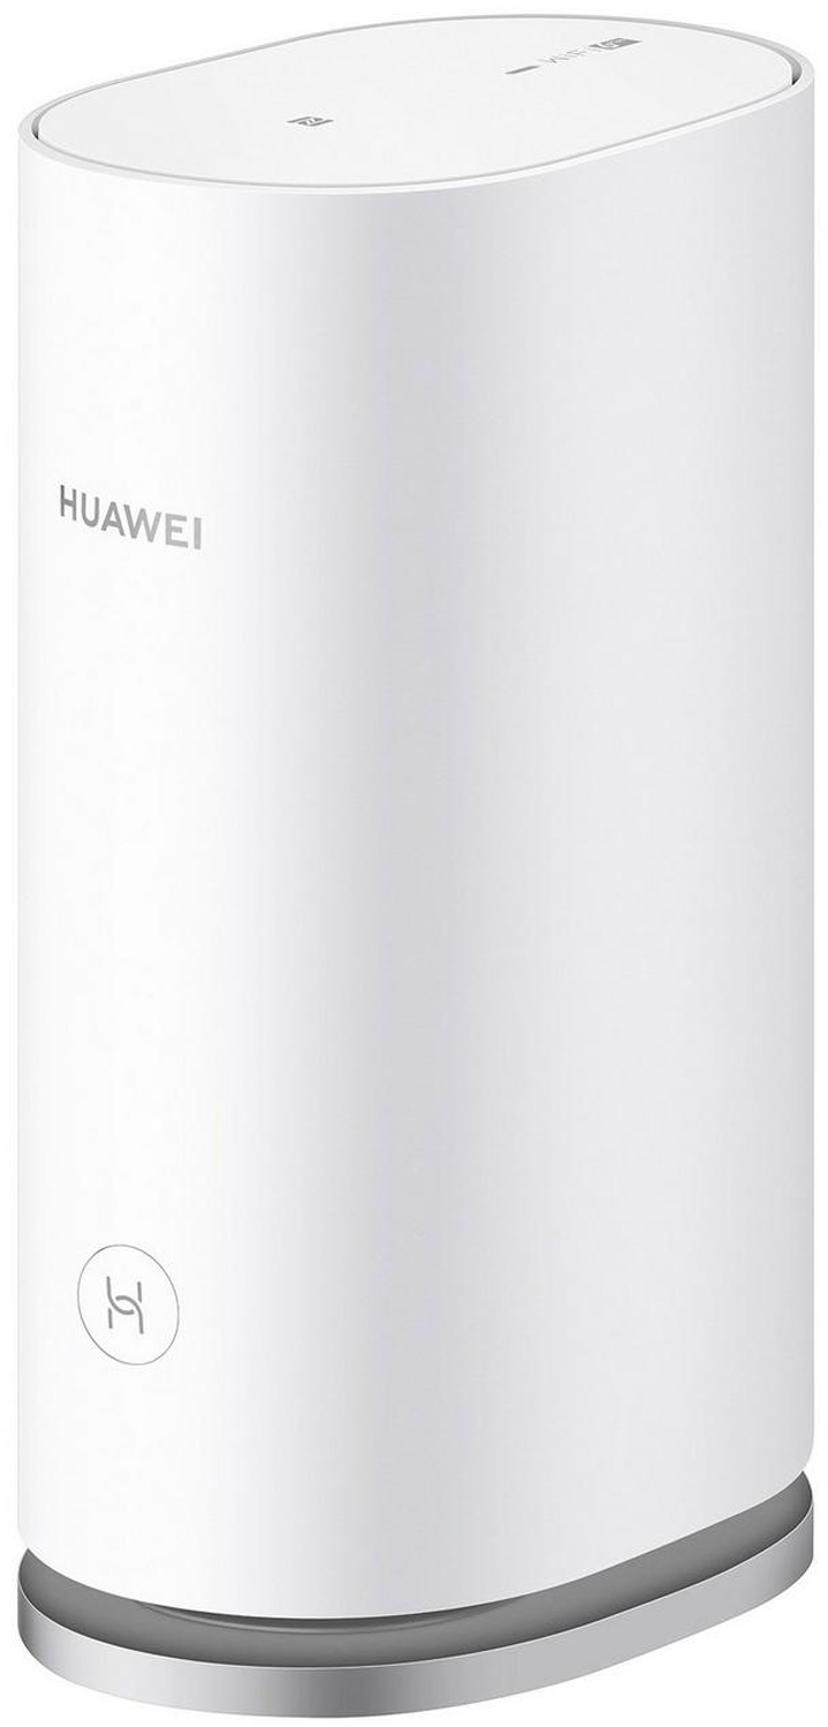 Huawei H155-381 CPE 5G Router + WS8100-21 AX3000